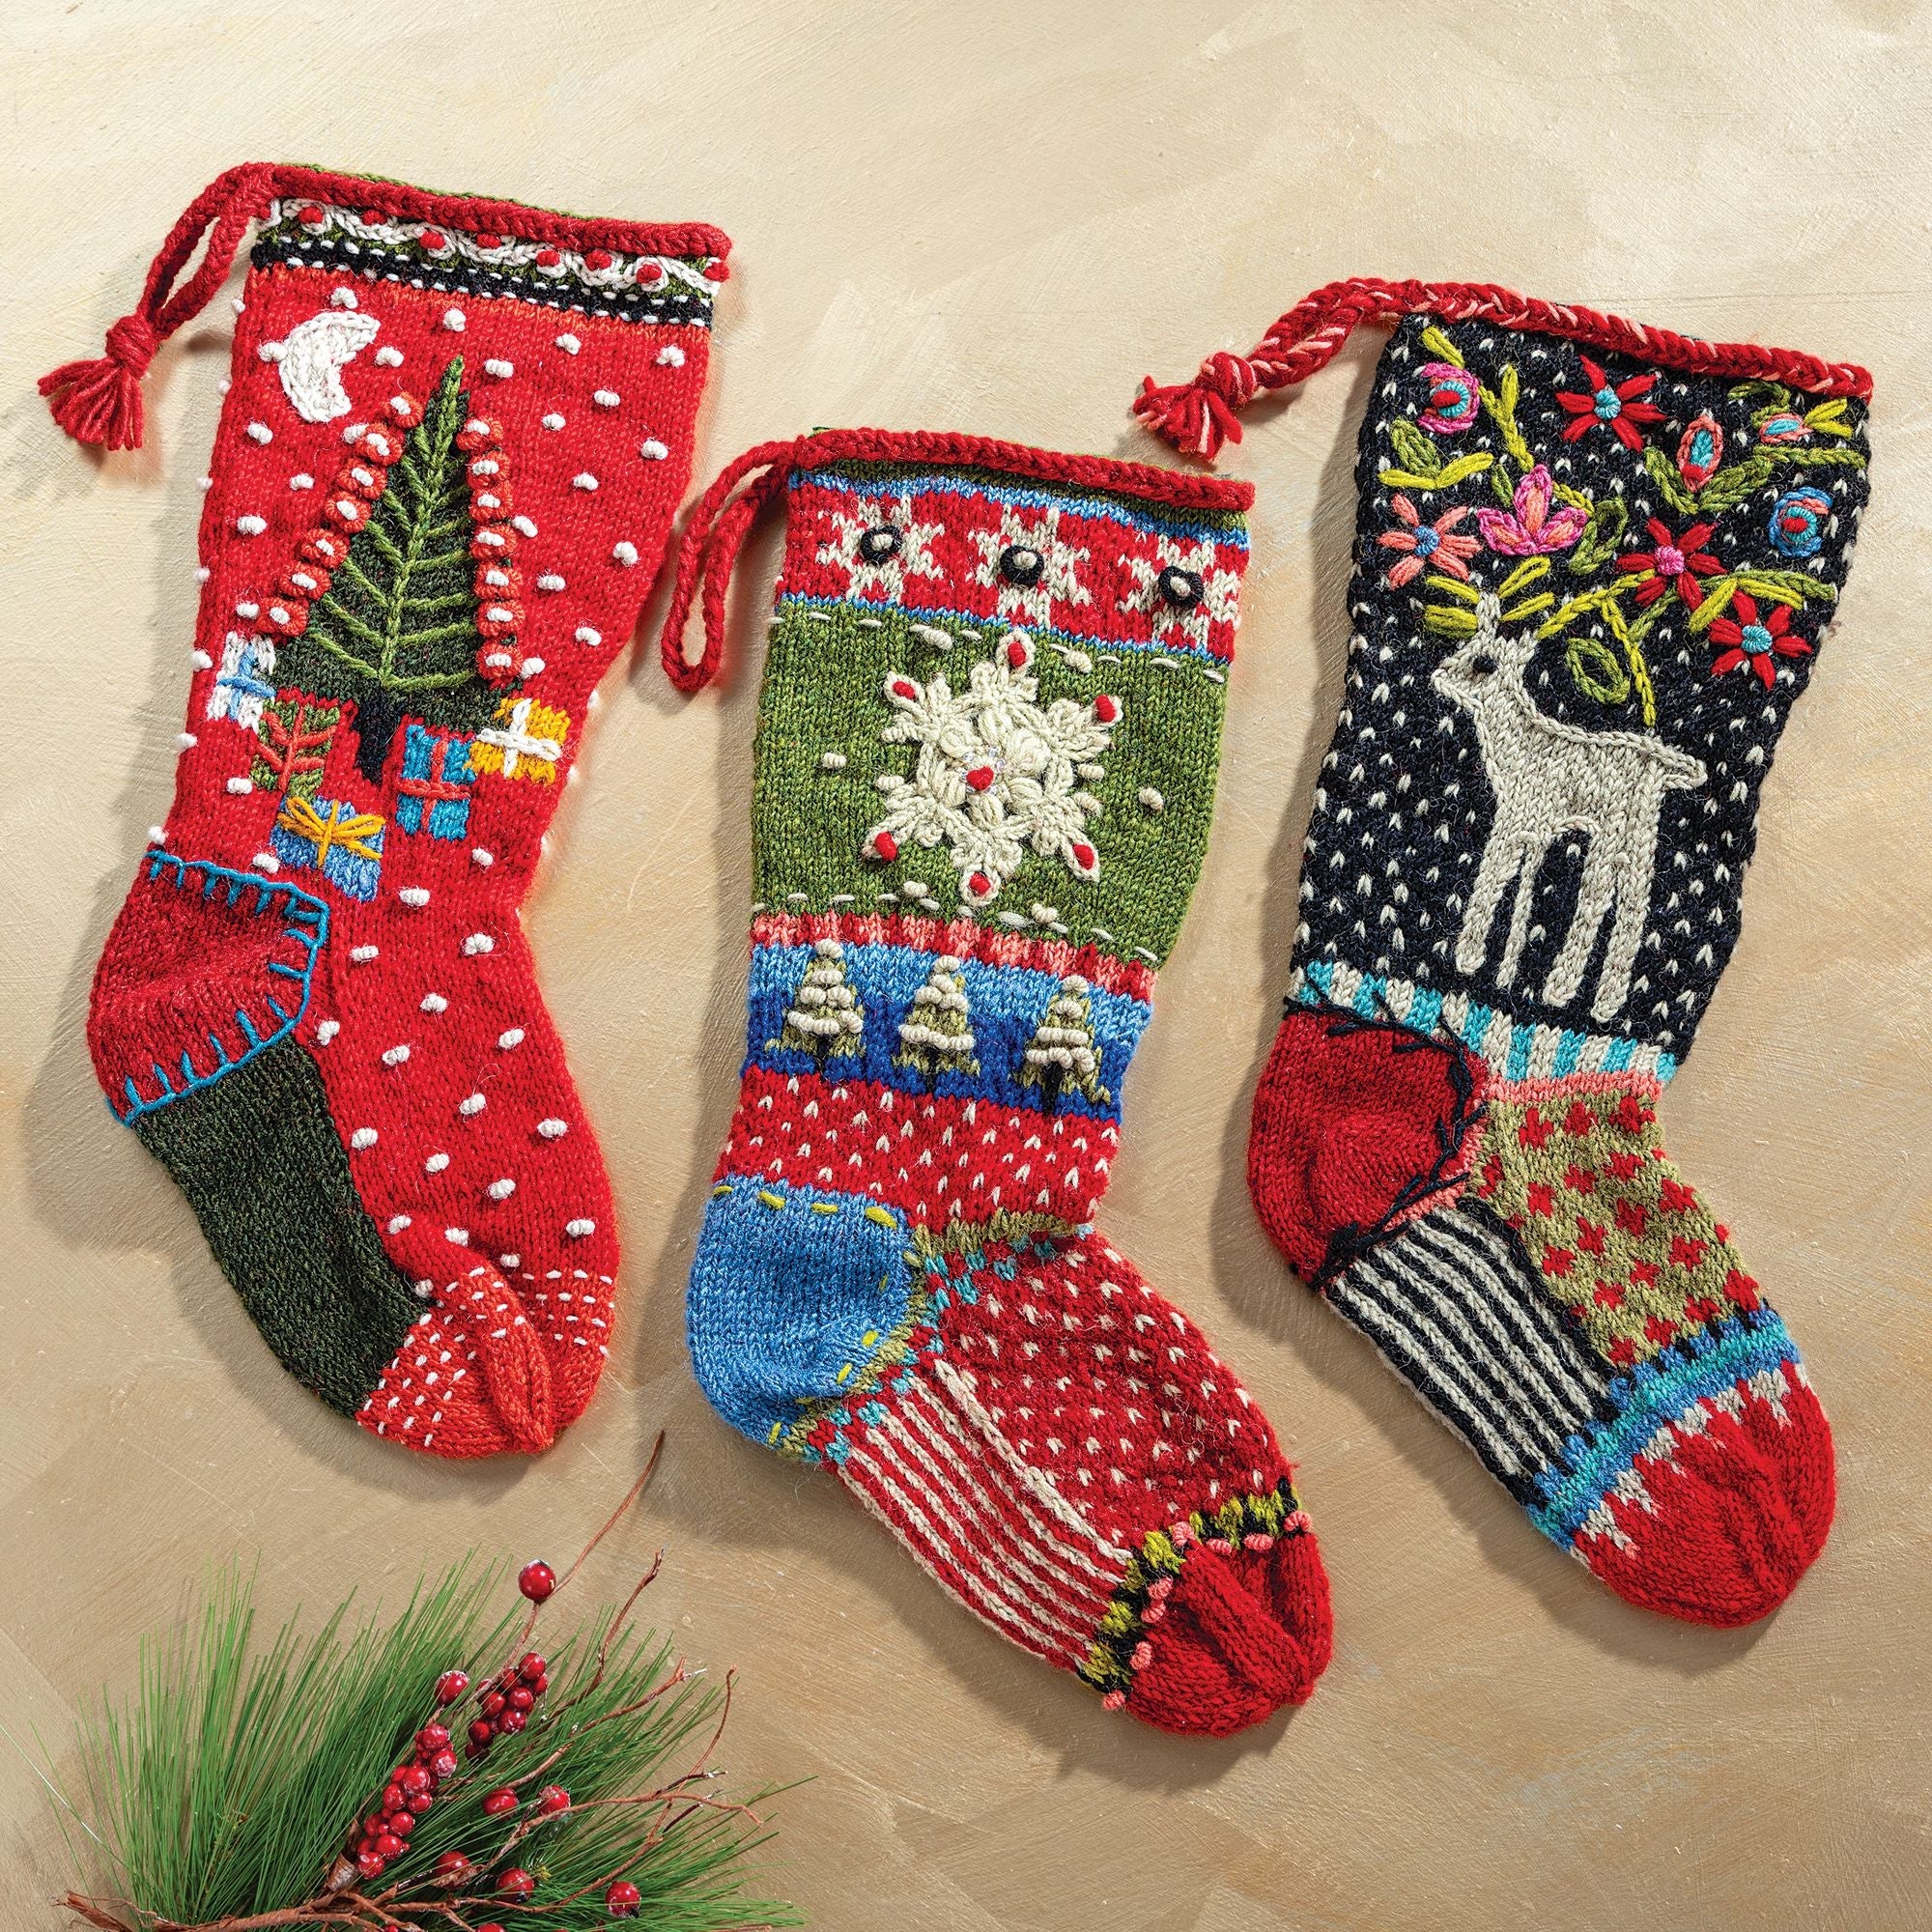 Hand-Knit Presents Under The Tree Christmas Stocking